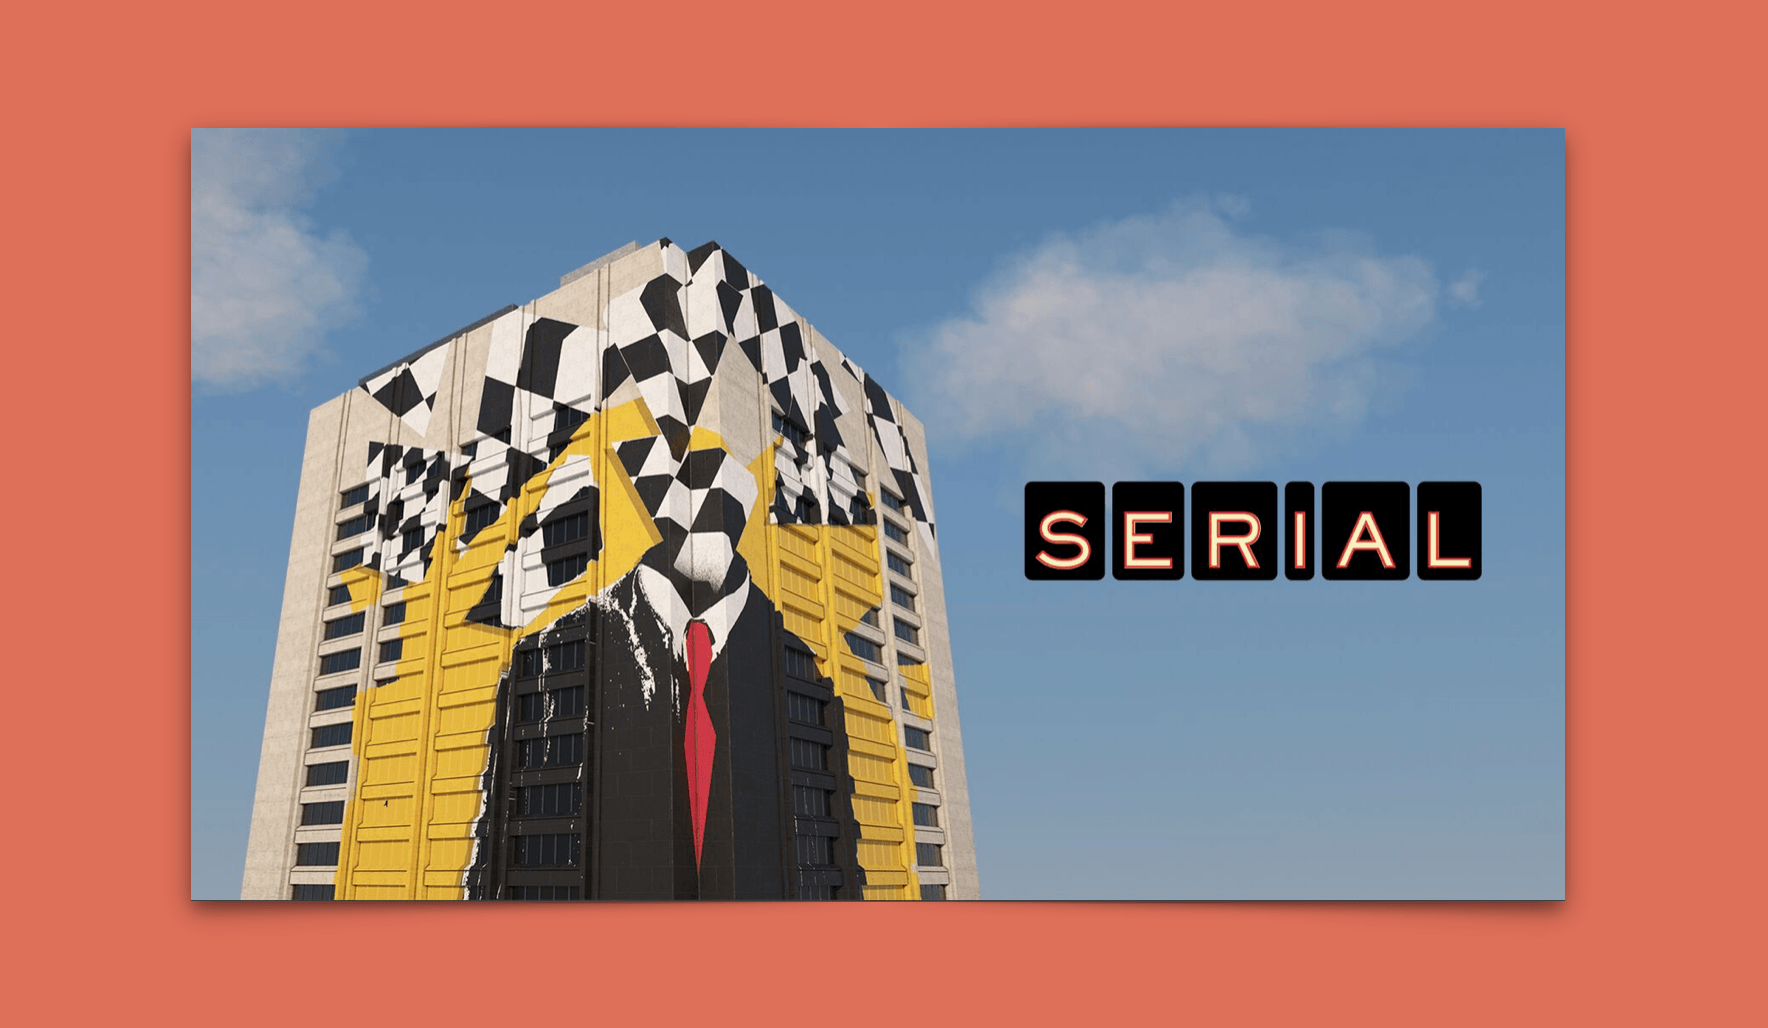 Serial Podcast Episode 3 Summary